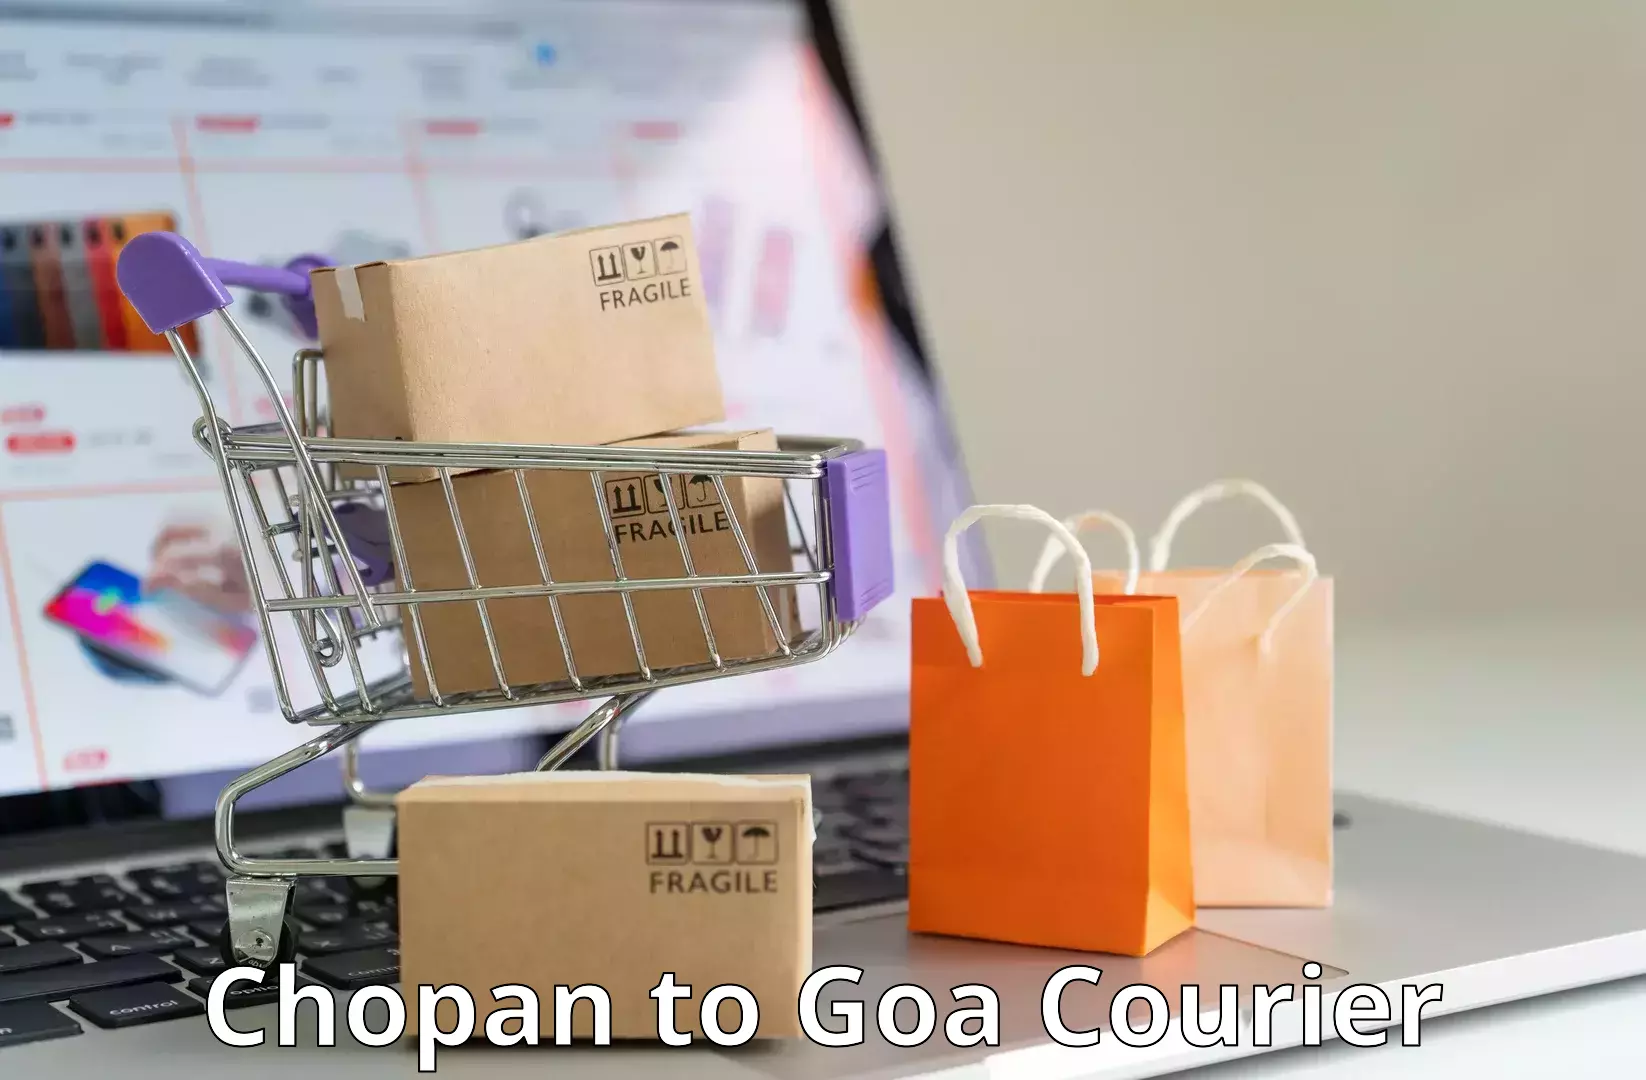 Cost-effective courier options Chopan to Goa